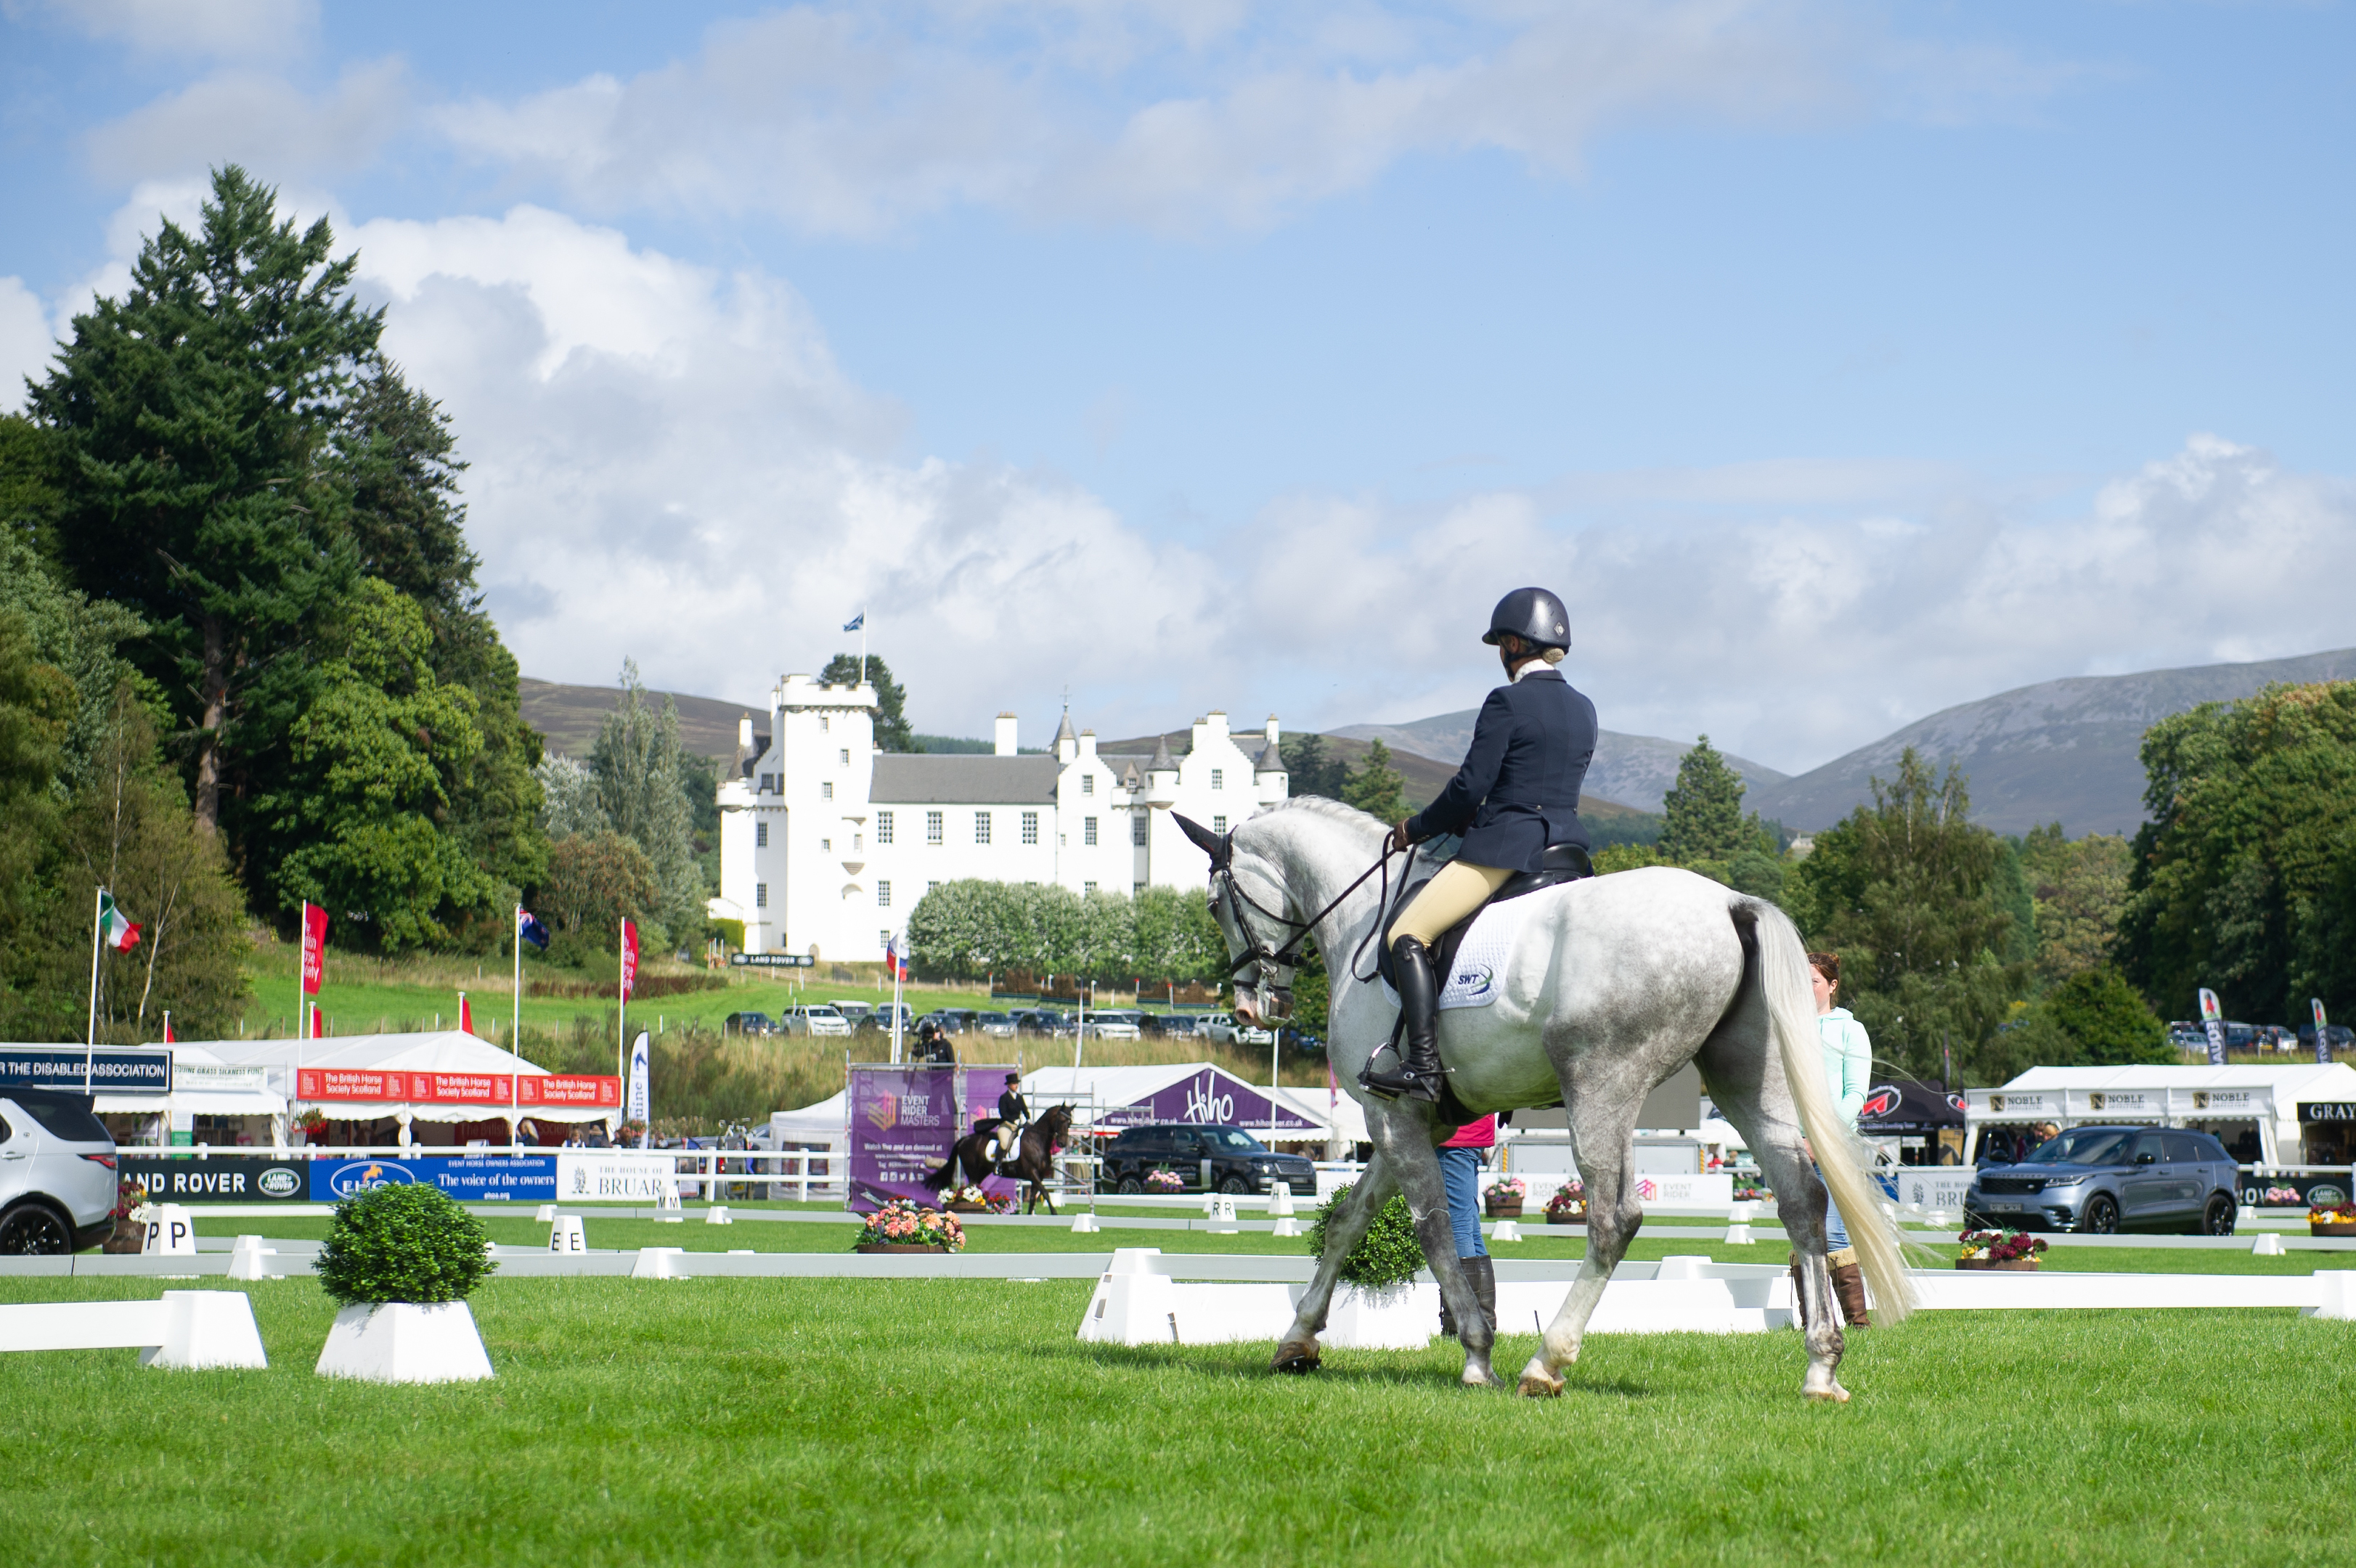 The Blair Castle International Horse Trials attracted thousands of competitors and spectators to Highland Perthshire.